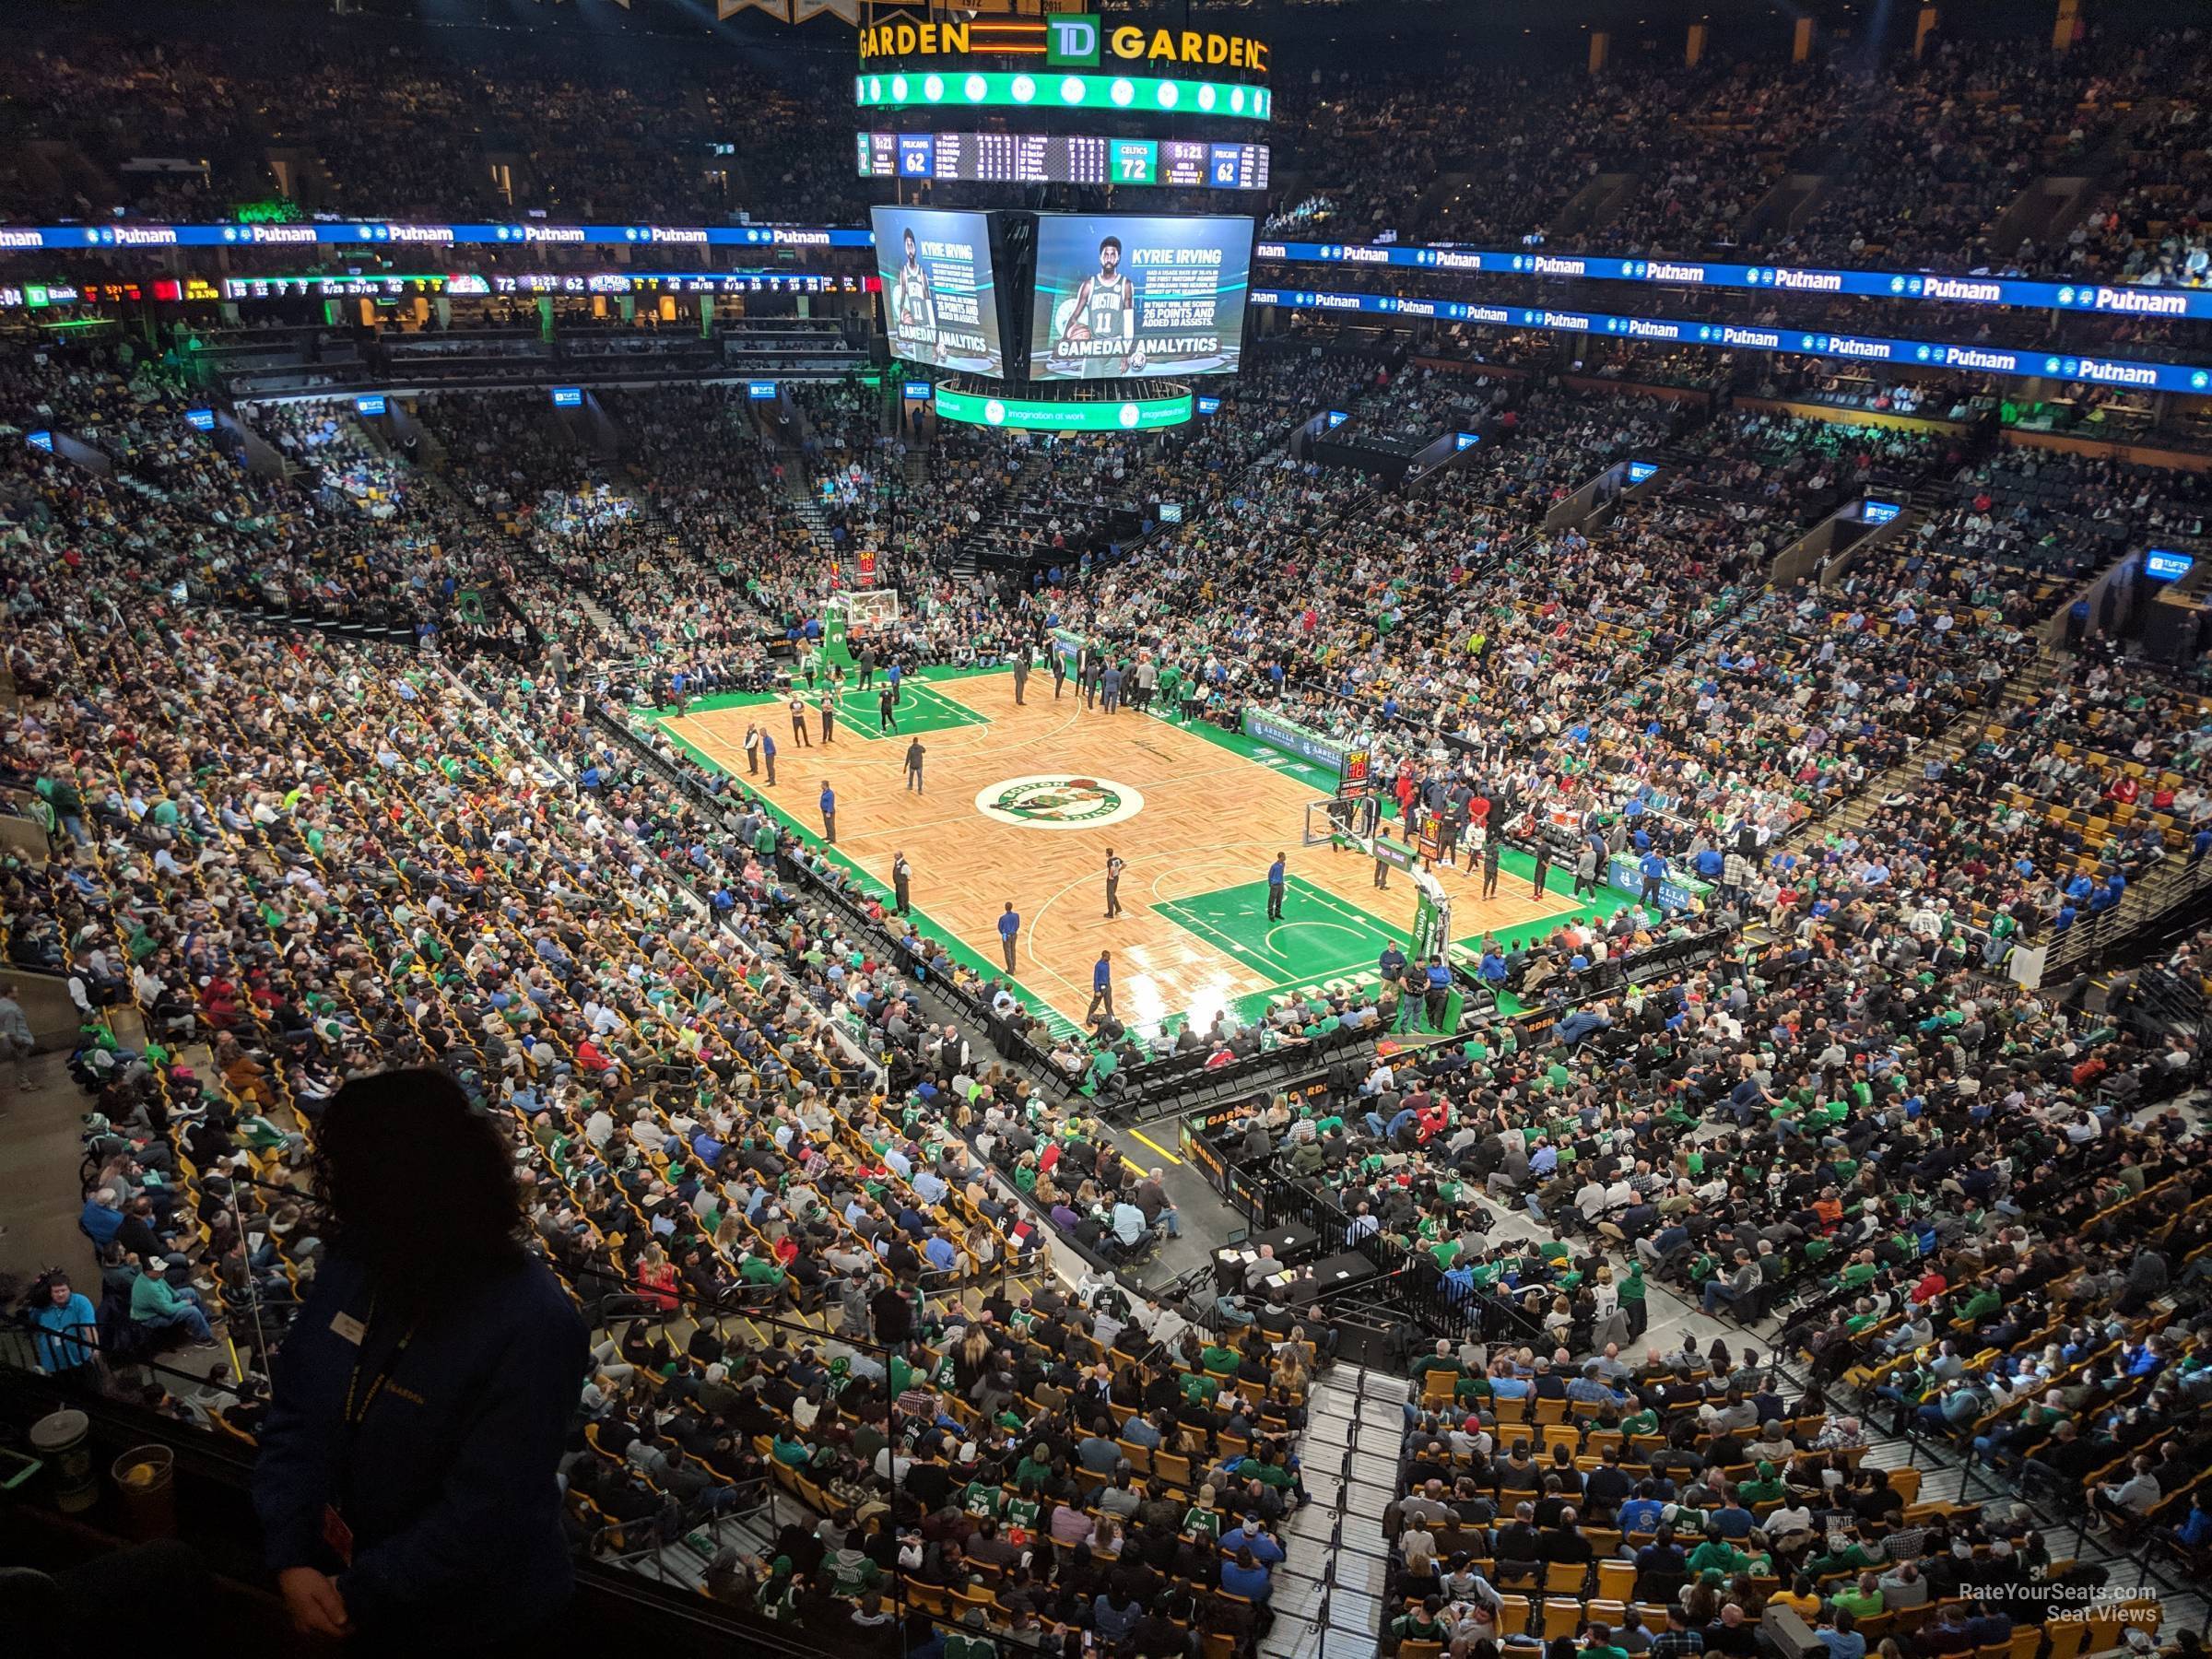 section 311, row 3 seat view  for basketball - td garden